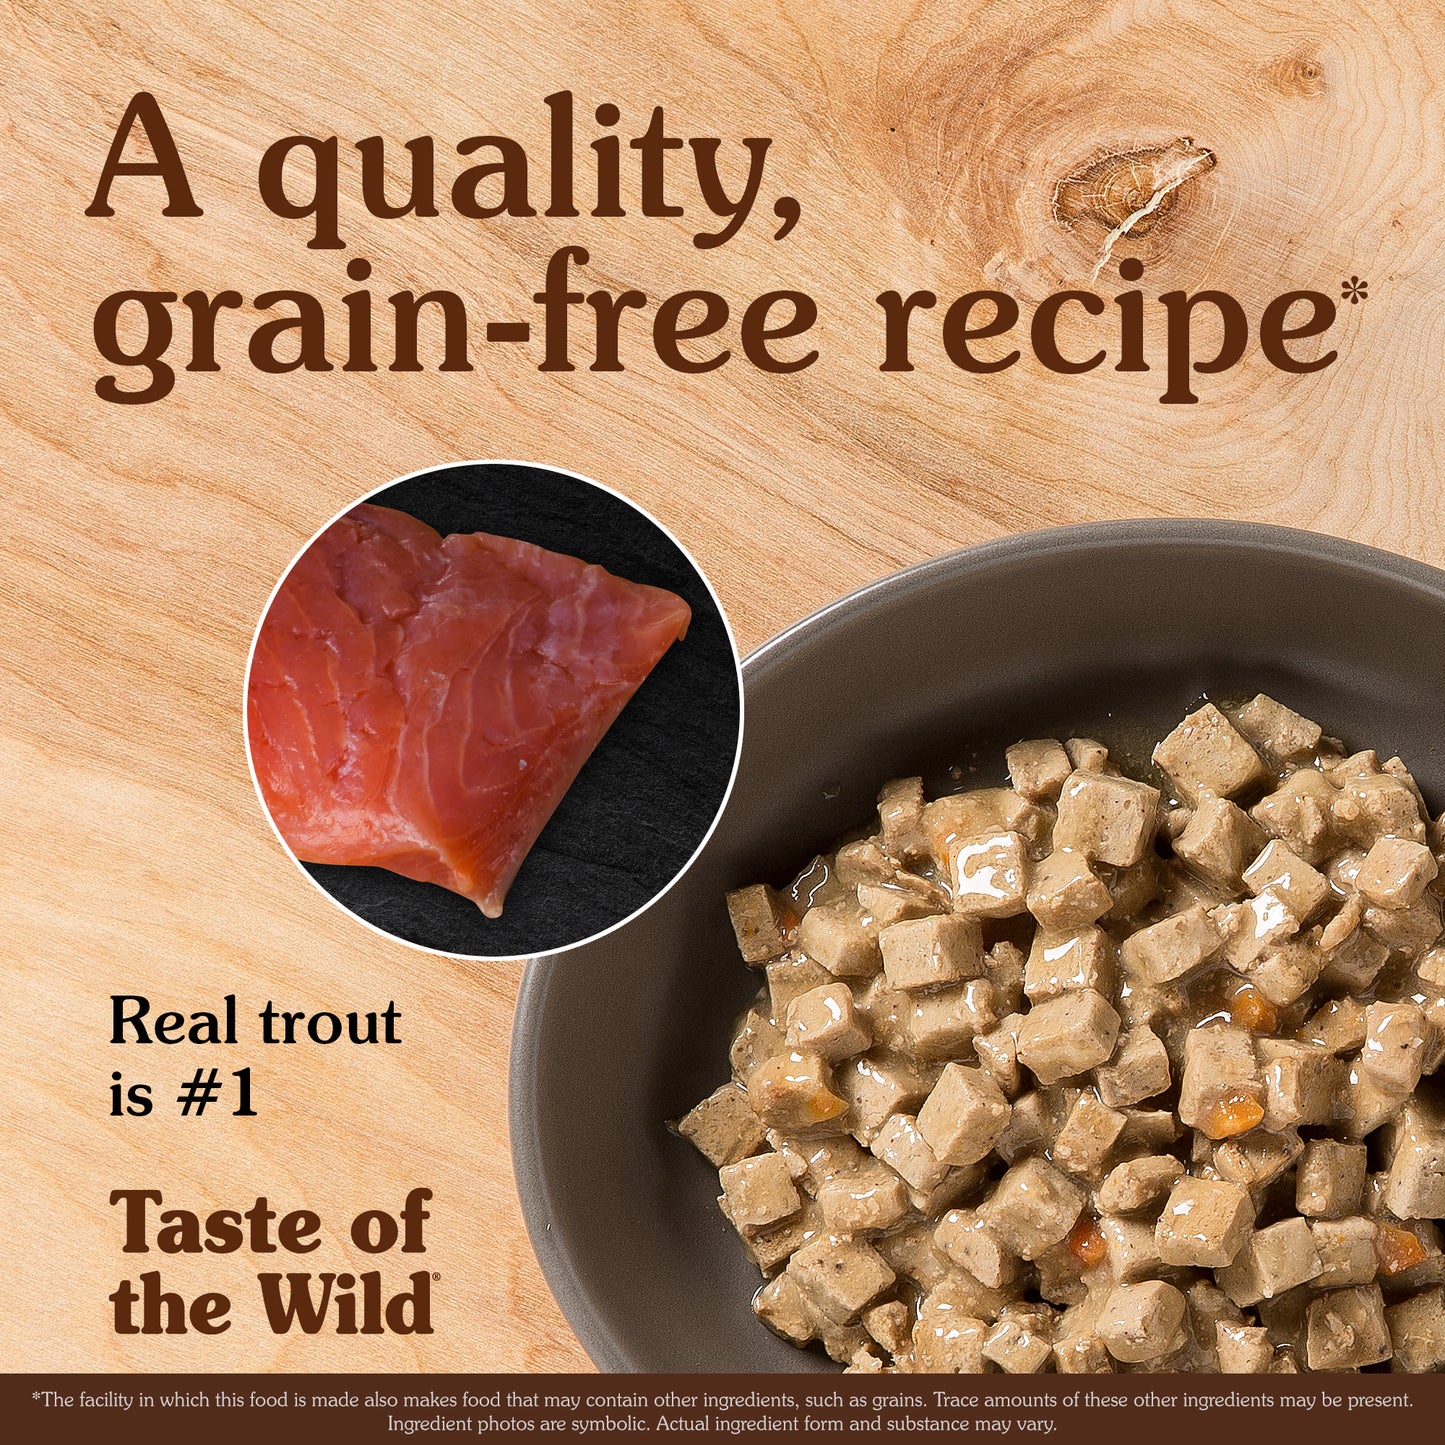 Taste of the Wild Canyon River Feline Recipe with Trout and Salmon in Gravy, Wet Cat Food